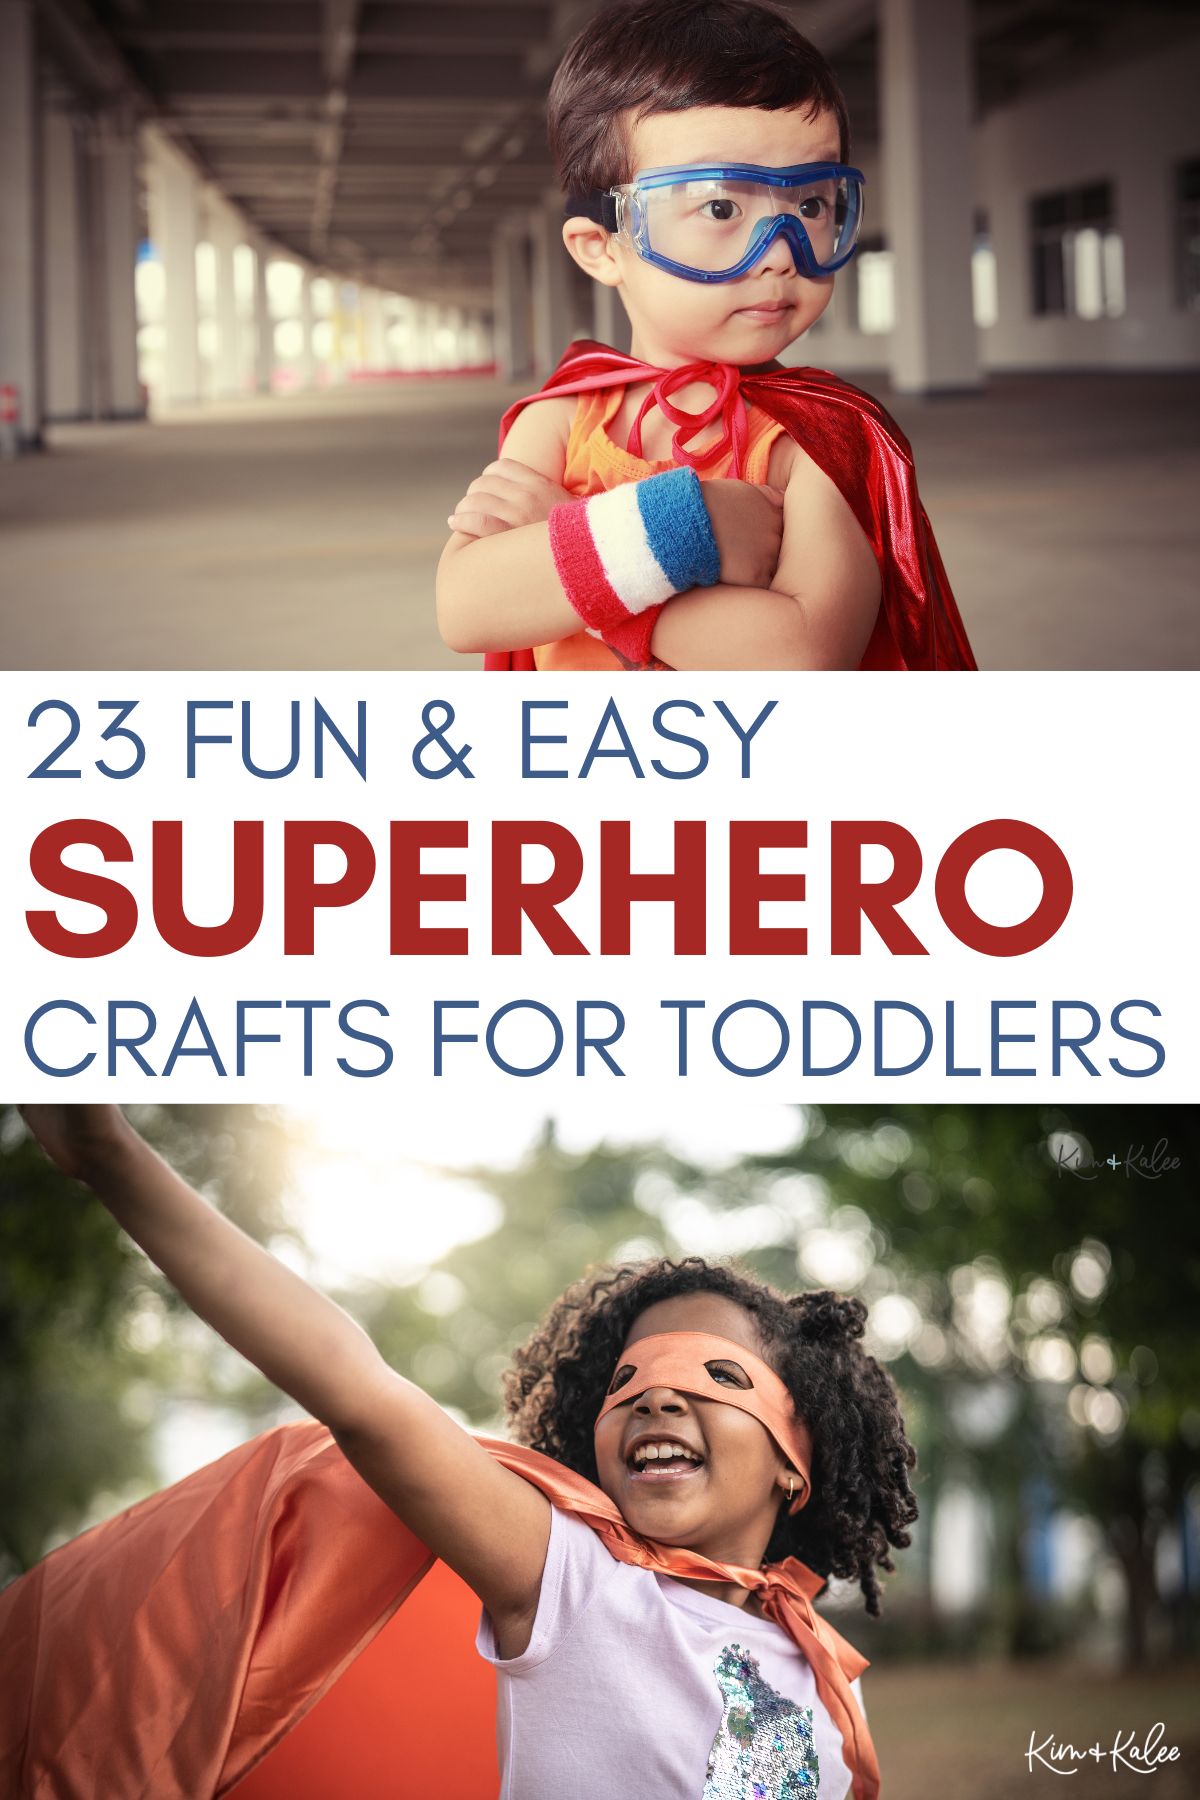 collage of two toddlers in superhero crafts - the top image is a little boy and the bottom is a little girl - text overlay in the middle says The 23 Fun & Easy Superhero Crafts for Toddlers